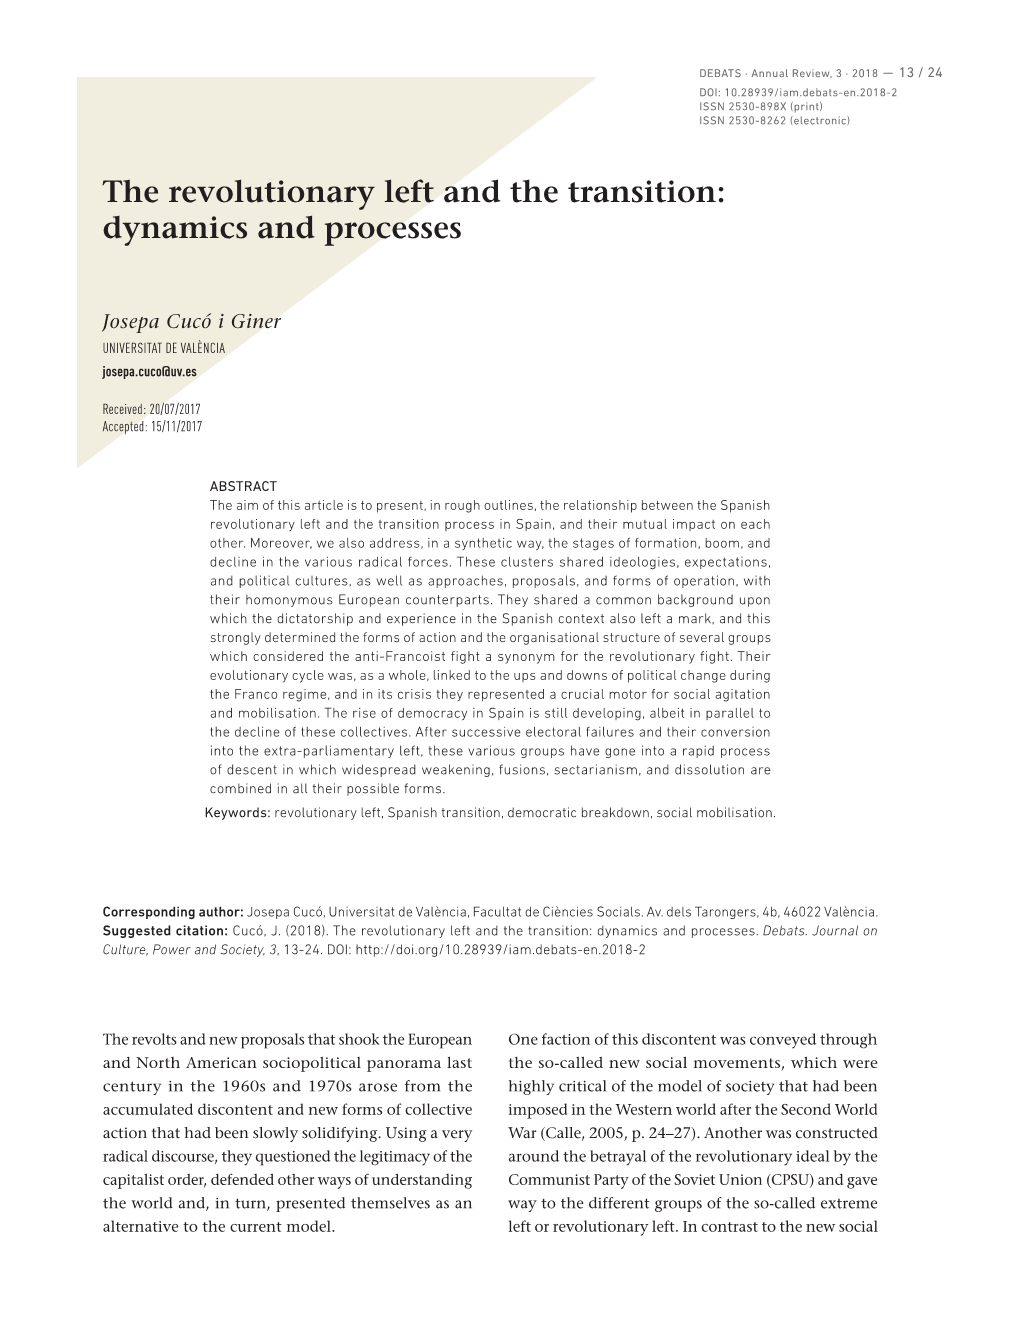 The Revolutionary Left and the Transition: Dynamics and Processes